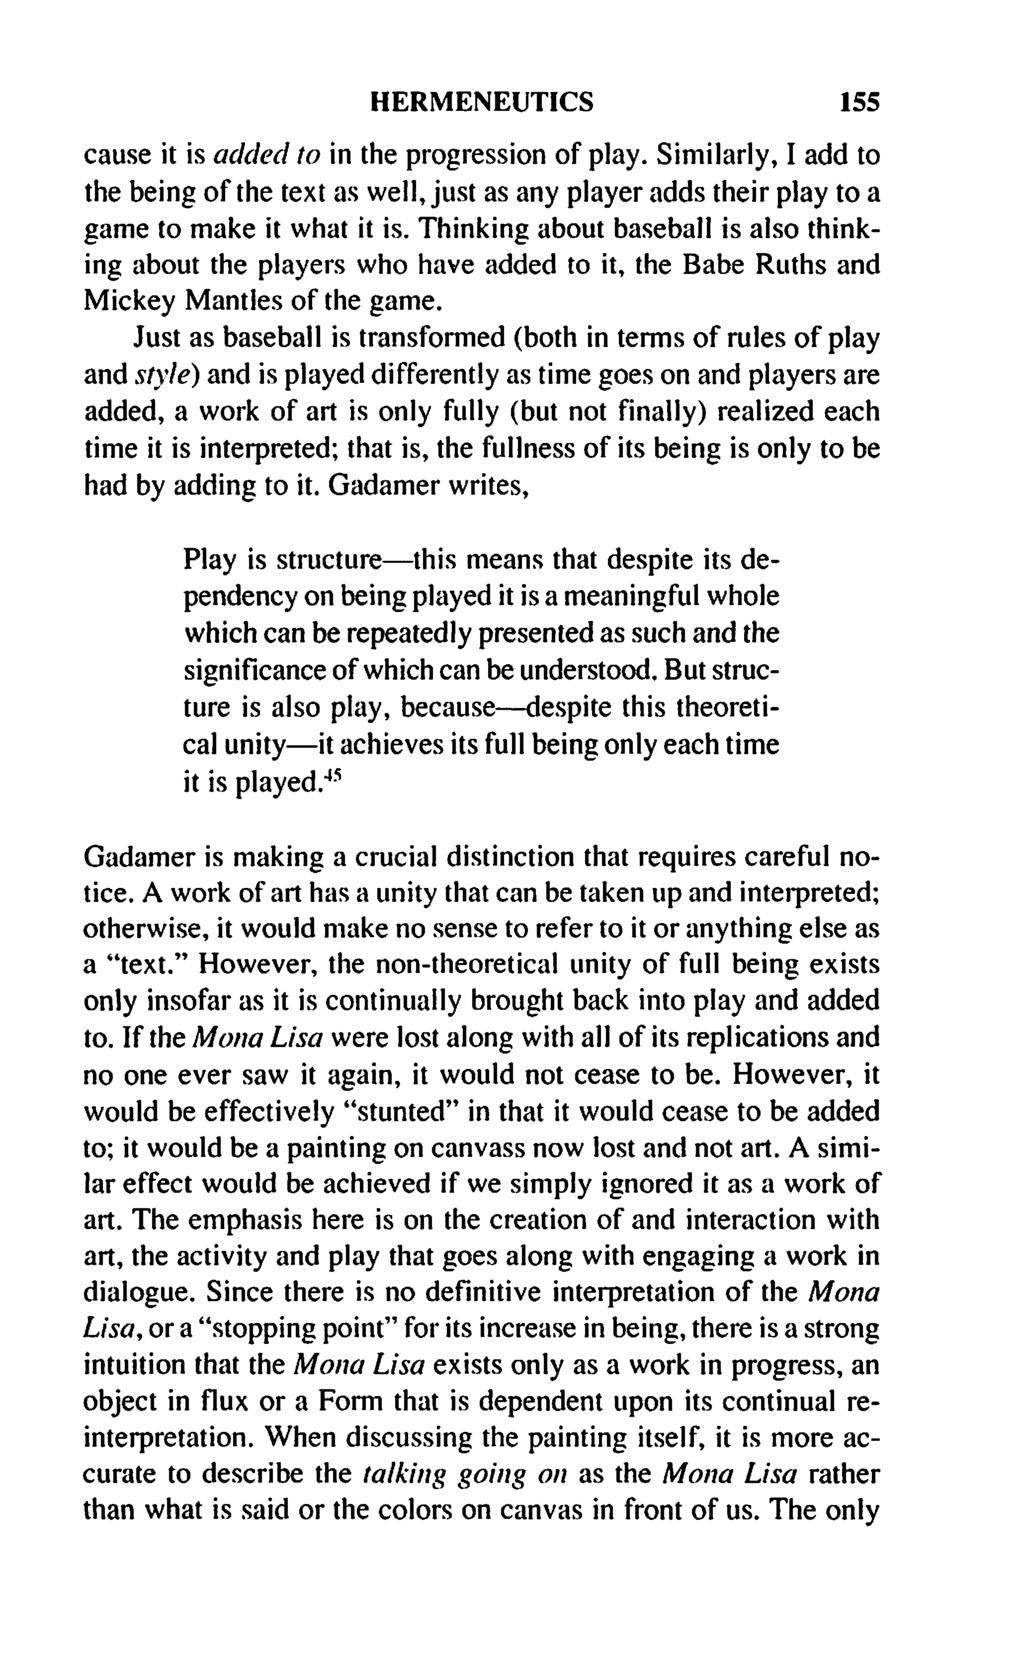 HERMENEUTICS 155 cause it is added to in the progression of play. Similarly, I add to the being of the text as well, just as any player adds their play to a game to make it what it is.